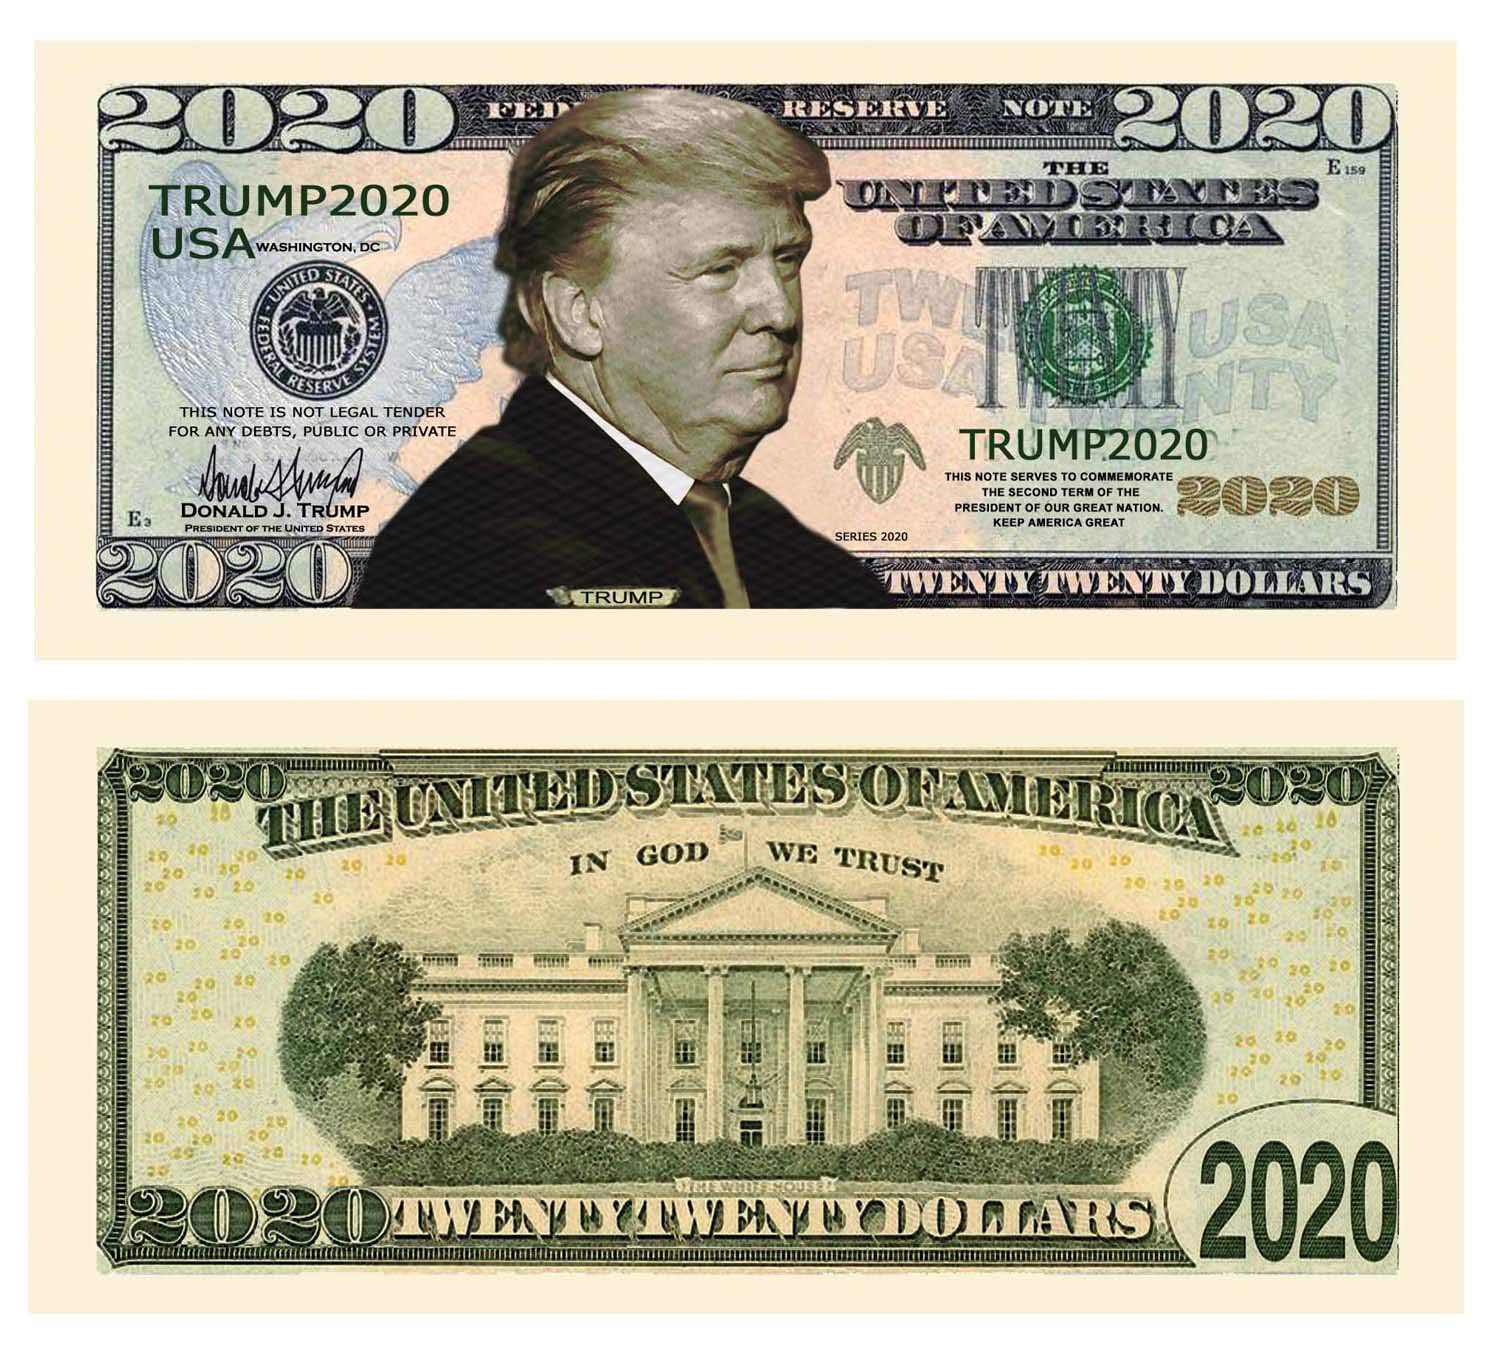 NinoStar 500 pcs of Donald Trump 2020 Dollar Bill Keep America Great President Re-Election Limited Edition Collection Pack of 